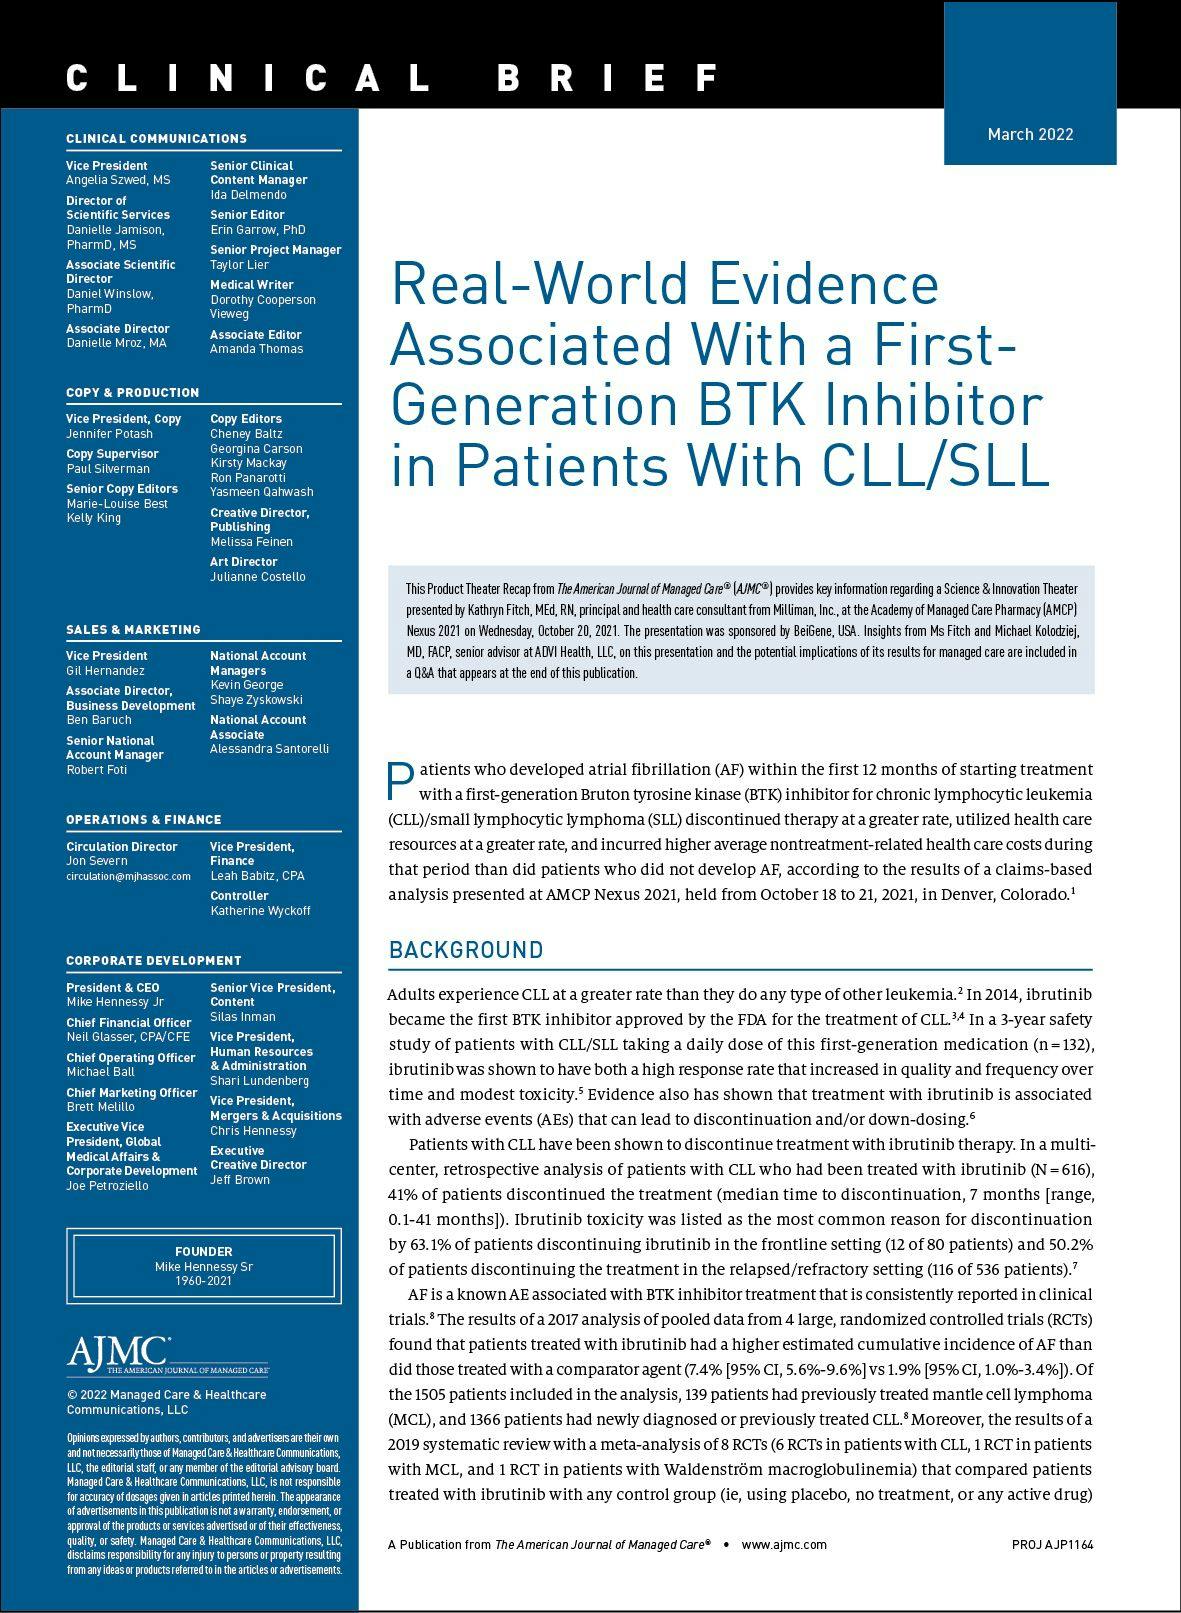 Real-World Evidence Associated With a First-Generation BTK Inhibitor in Patients With CLL/SLL